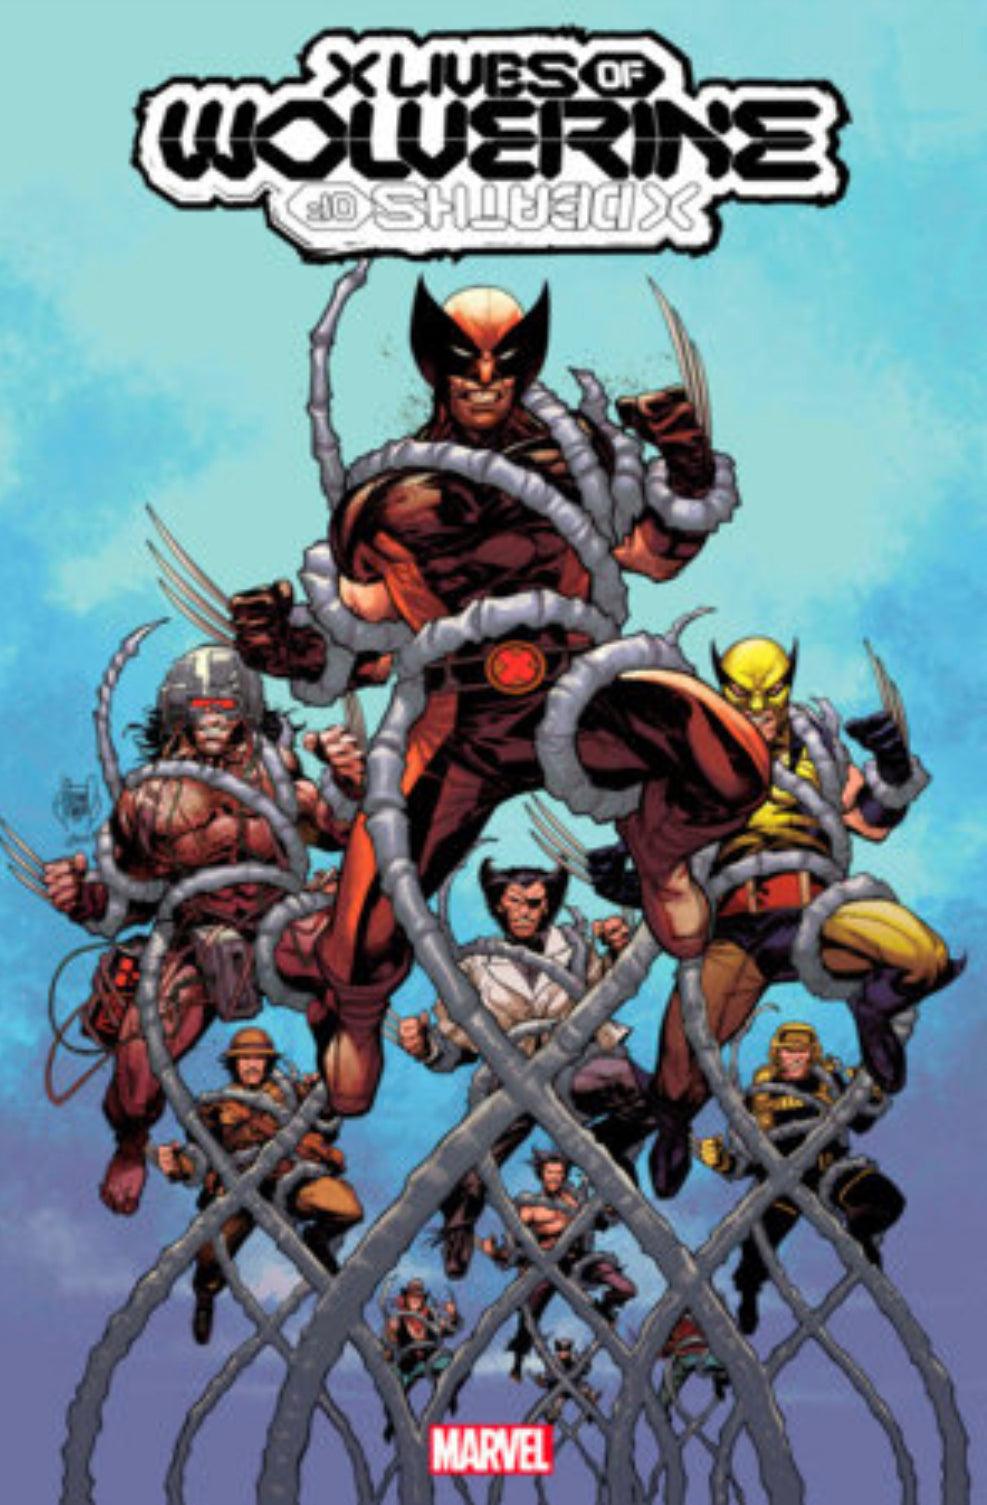 X Lives Of Wolverine #1 - HolyGrail Comix